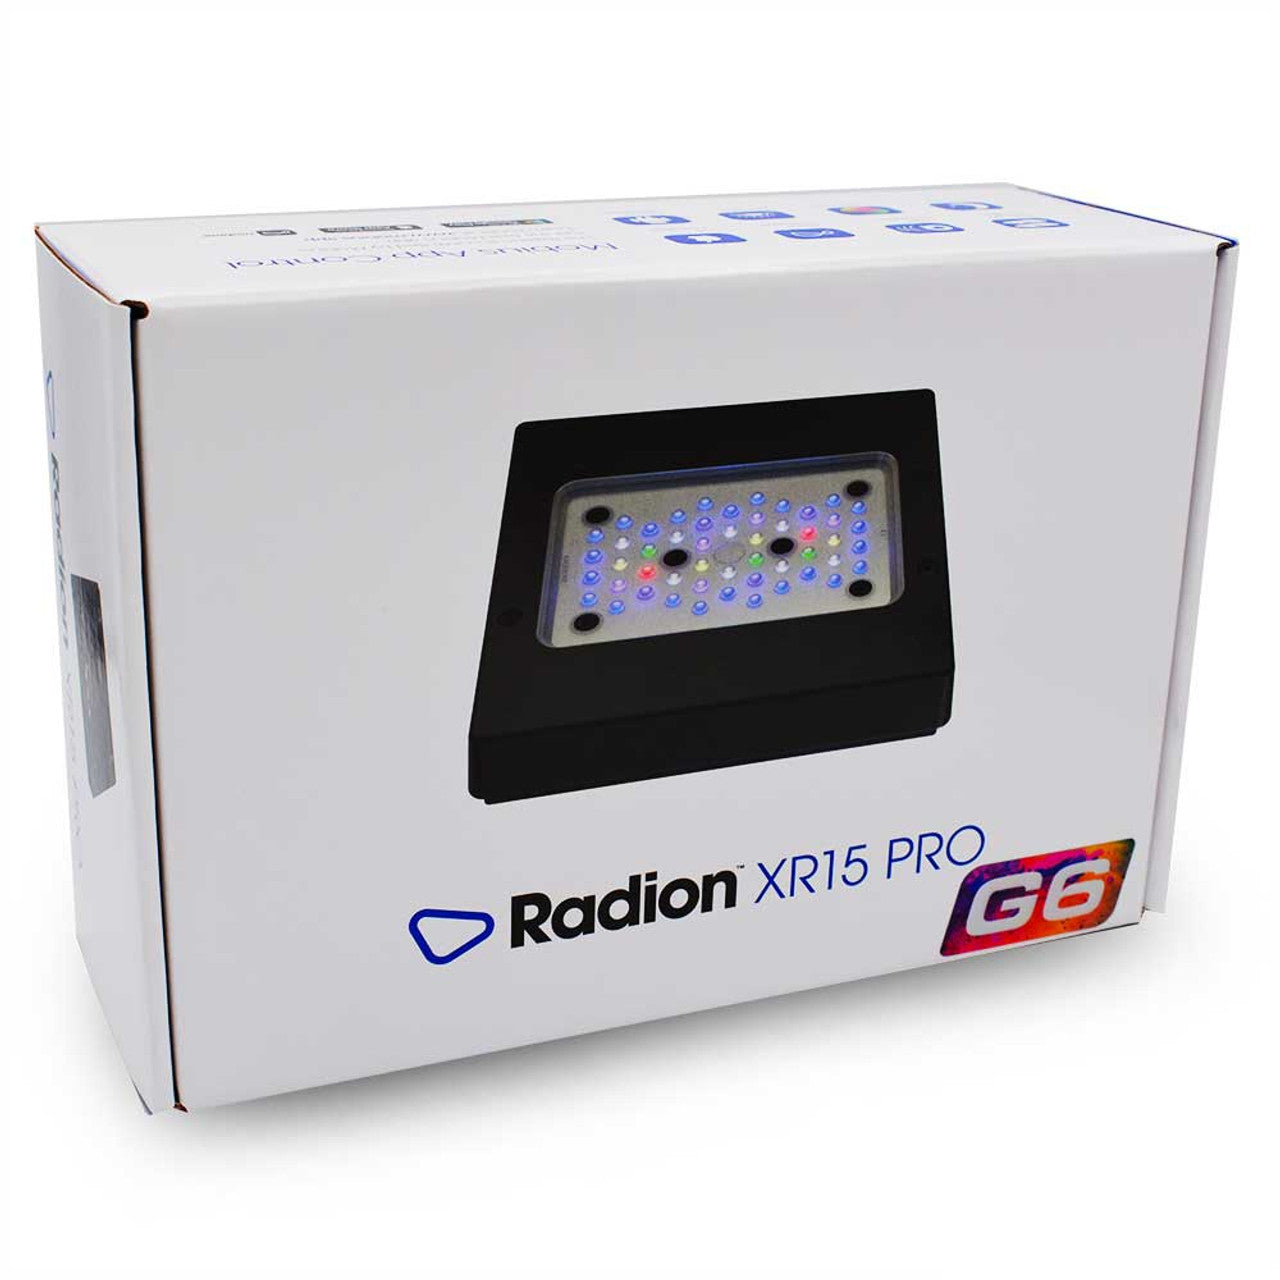 RADION® G6 XR15/ XR30 PRO- Exceptional LEDS - From £399.99